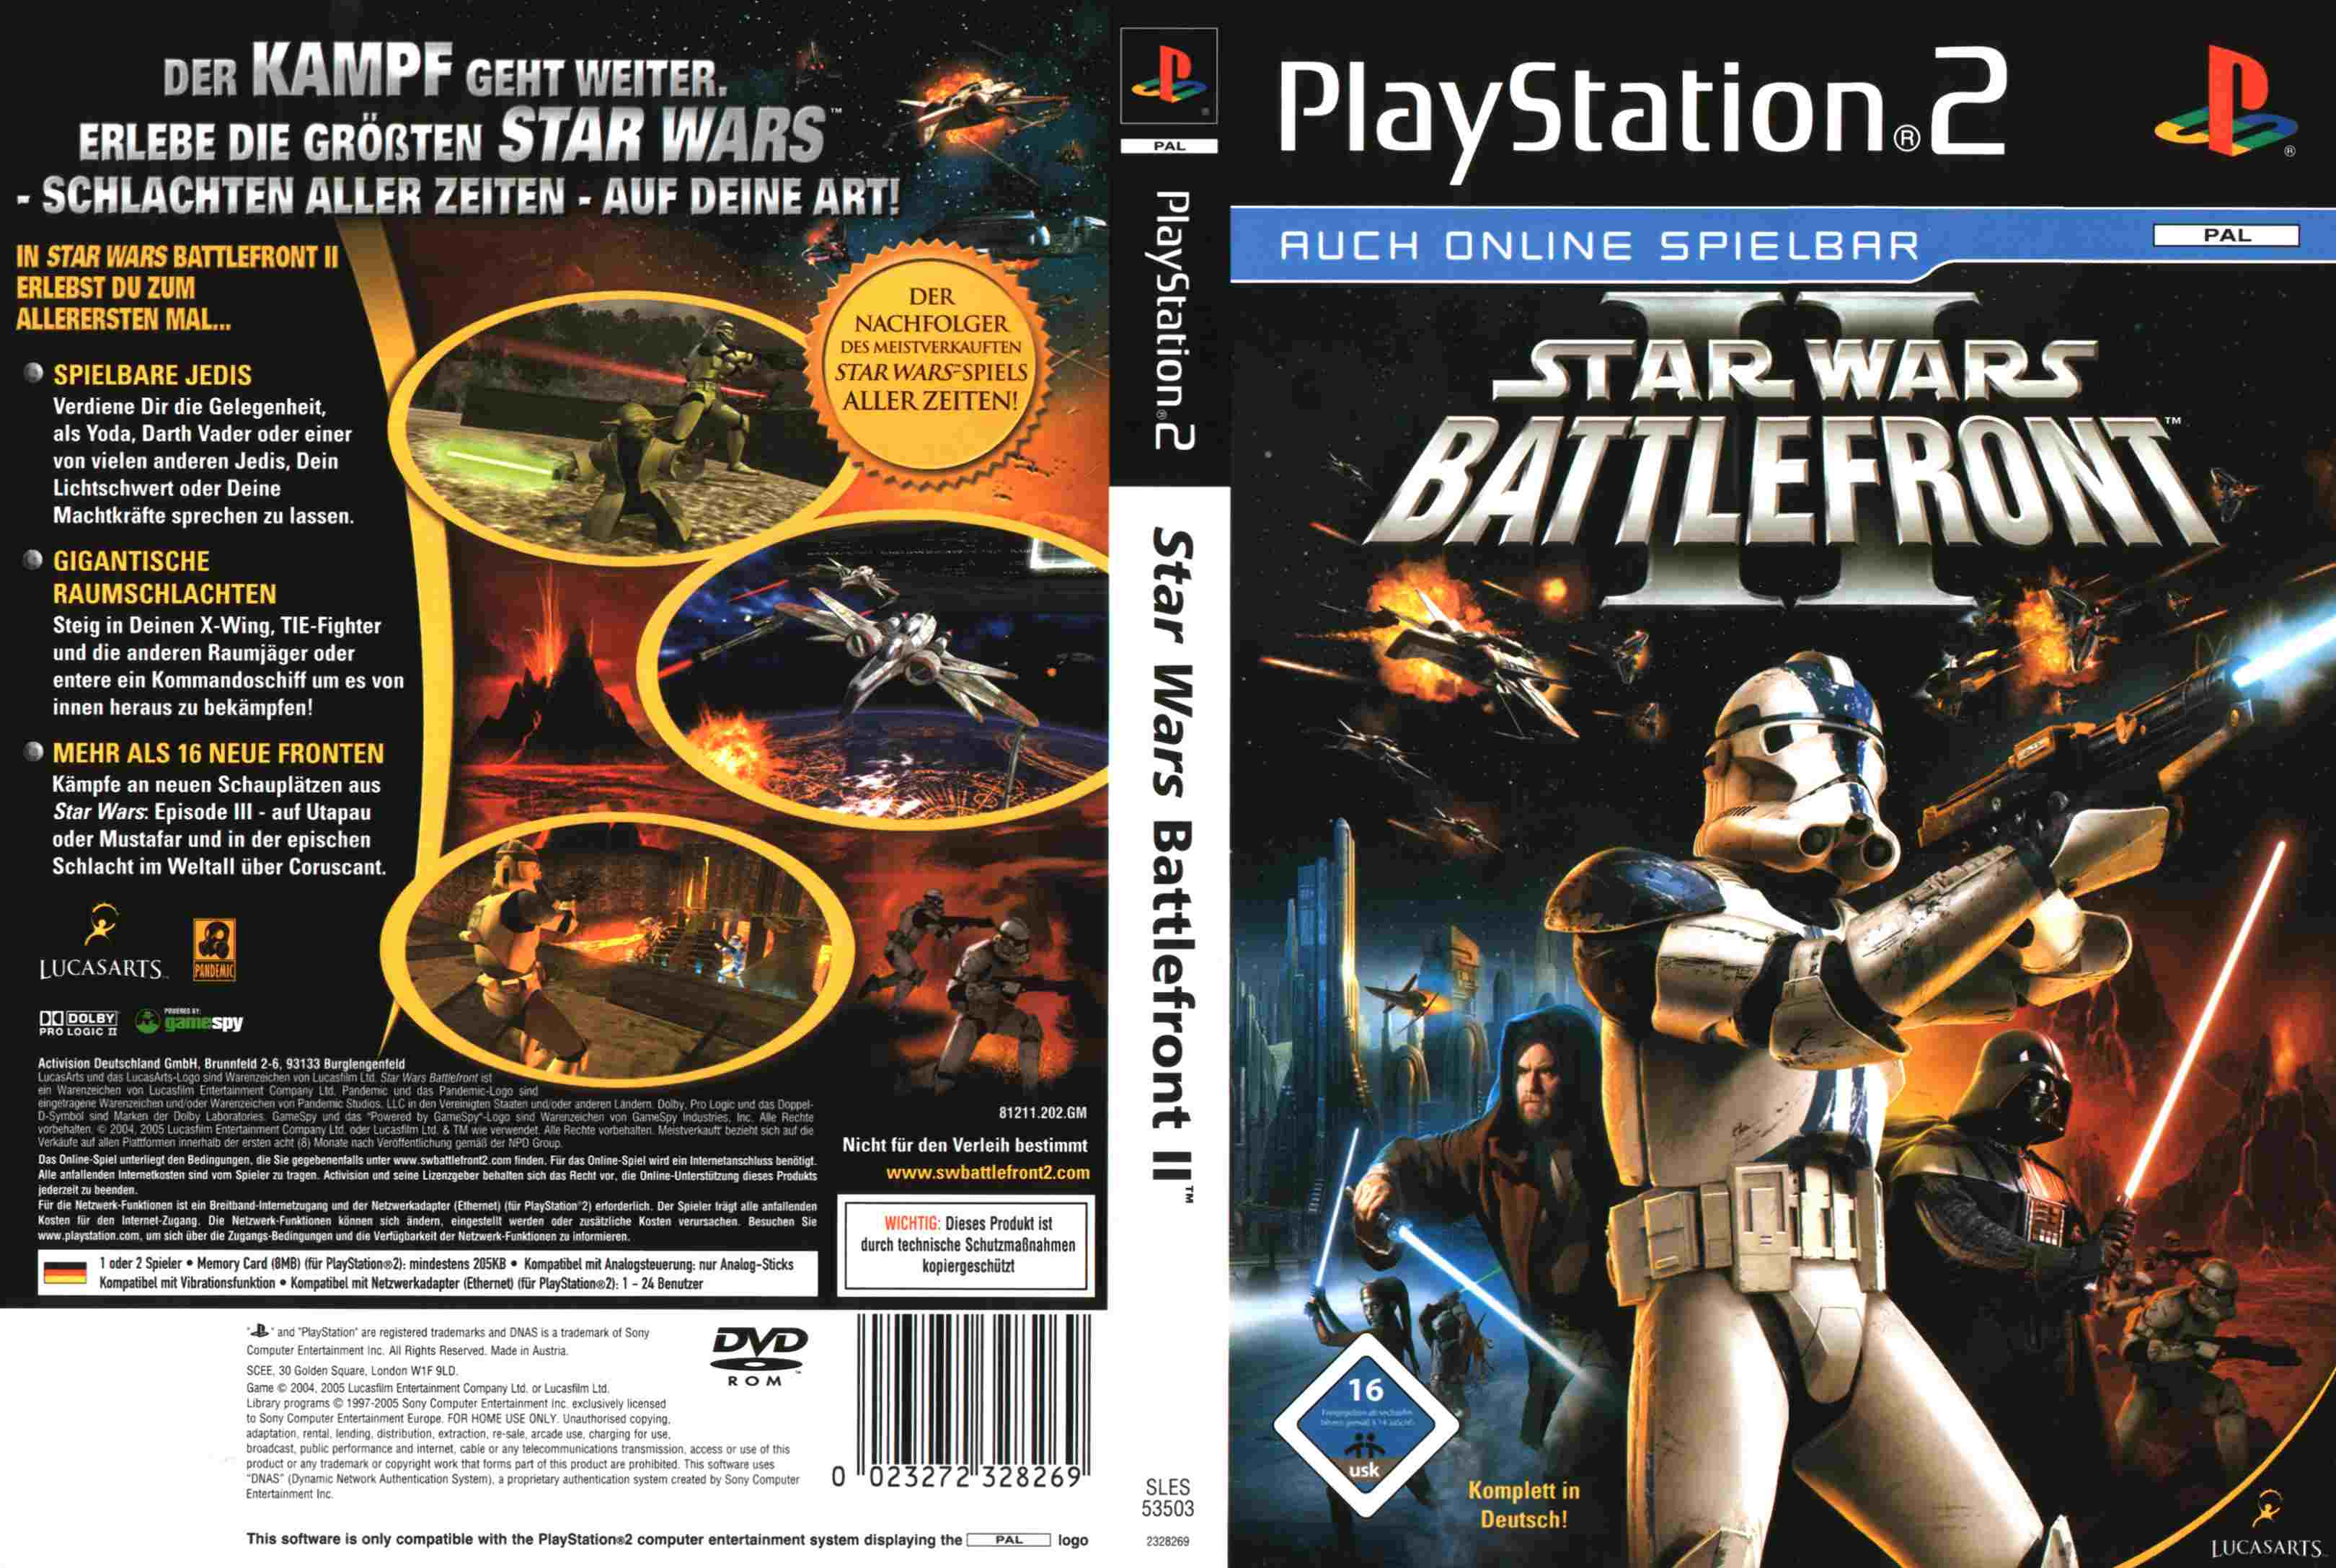 Star wars battlefront classic collection nintendo. Star Wars Battlefront II обложка. Star Wars Battlefront PLAYSTATION 2. Star Wars Battlefront II ps2 обложка. Star Wars Battlefront 2 2005 обложка.